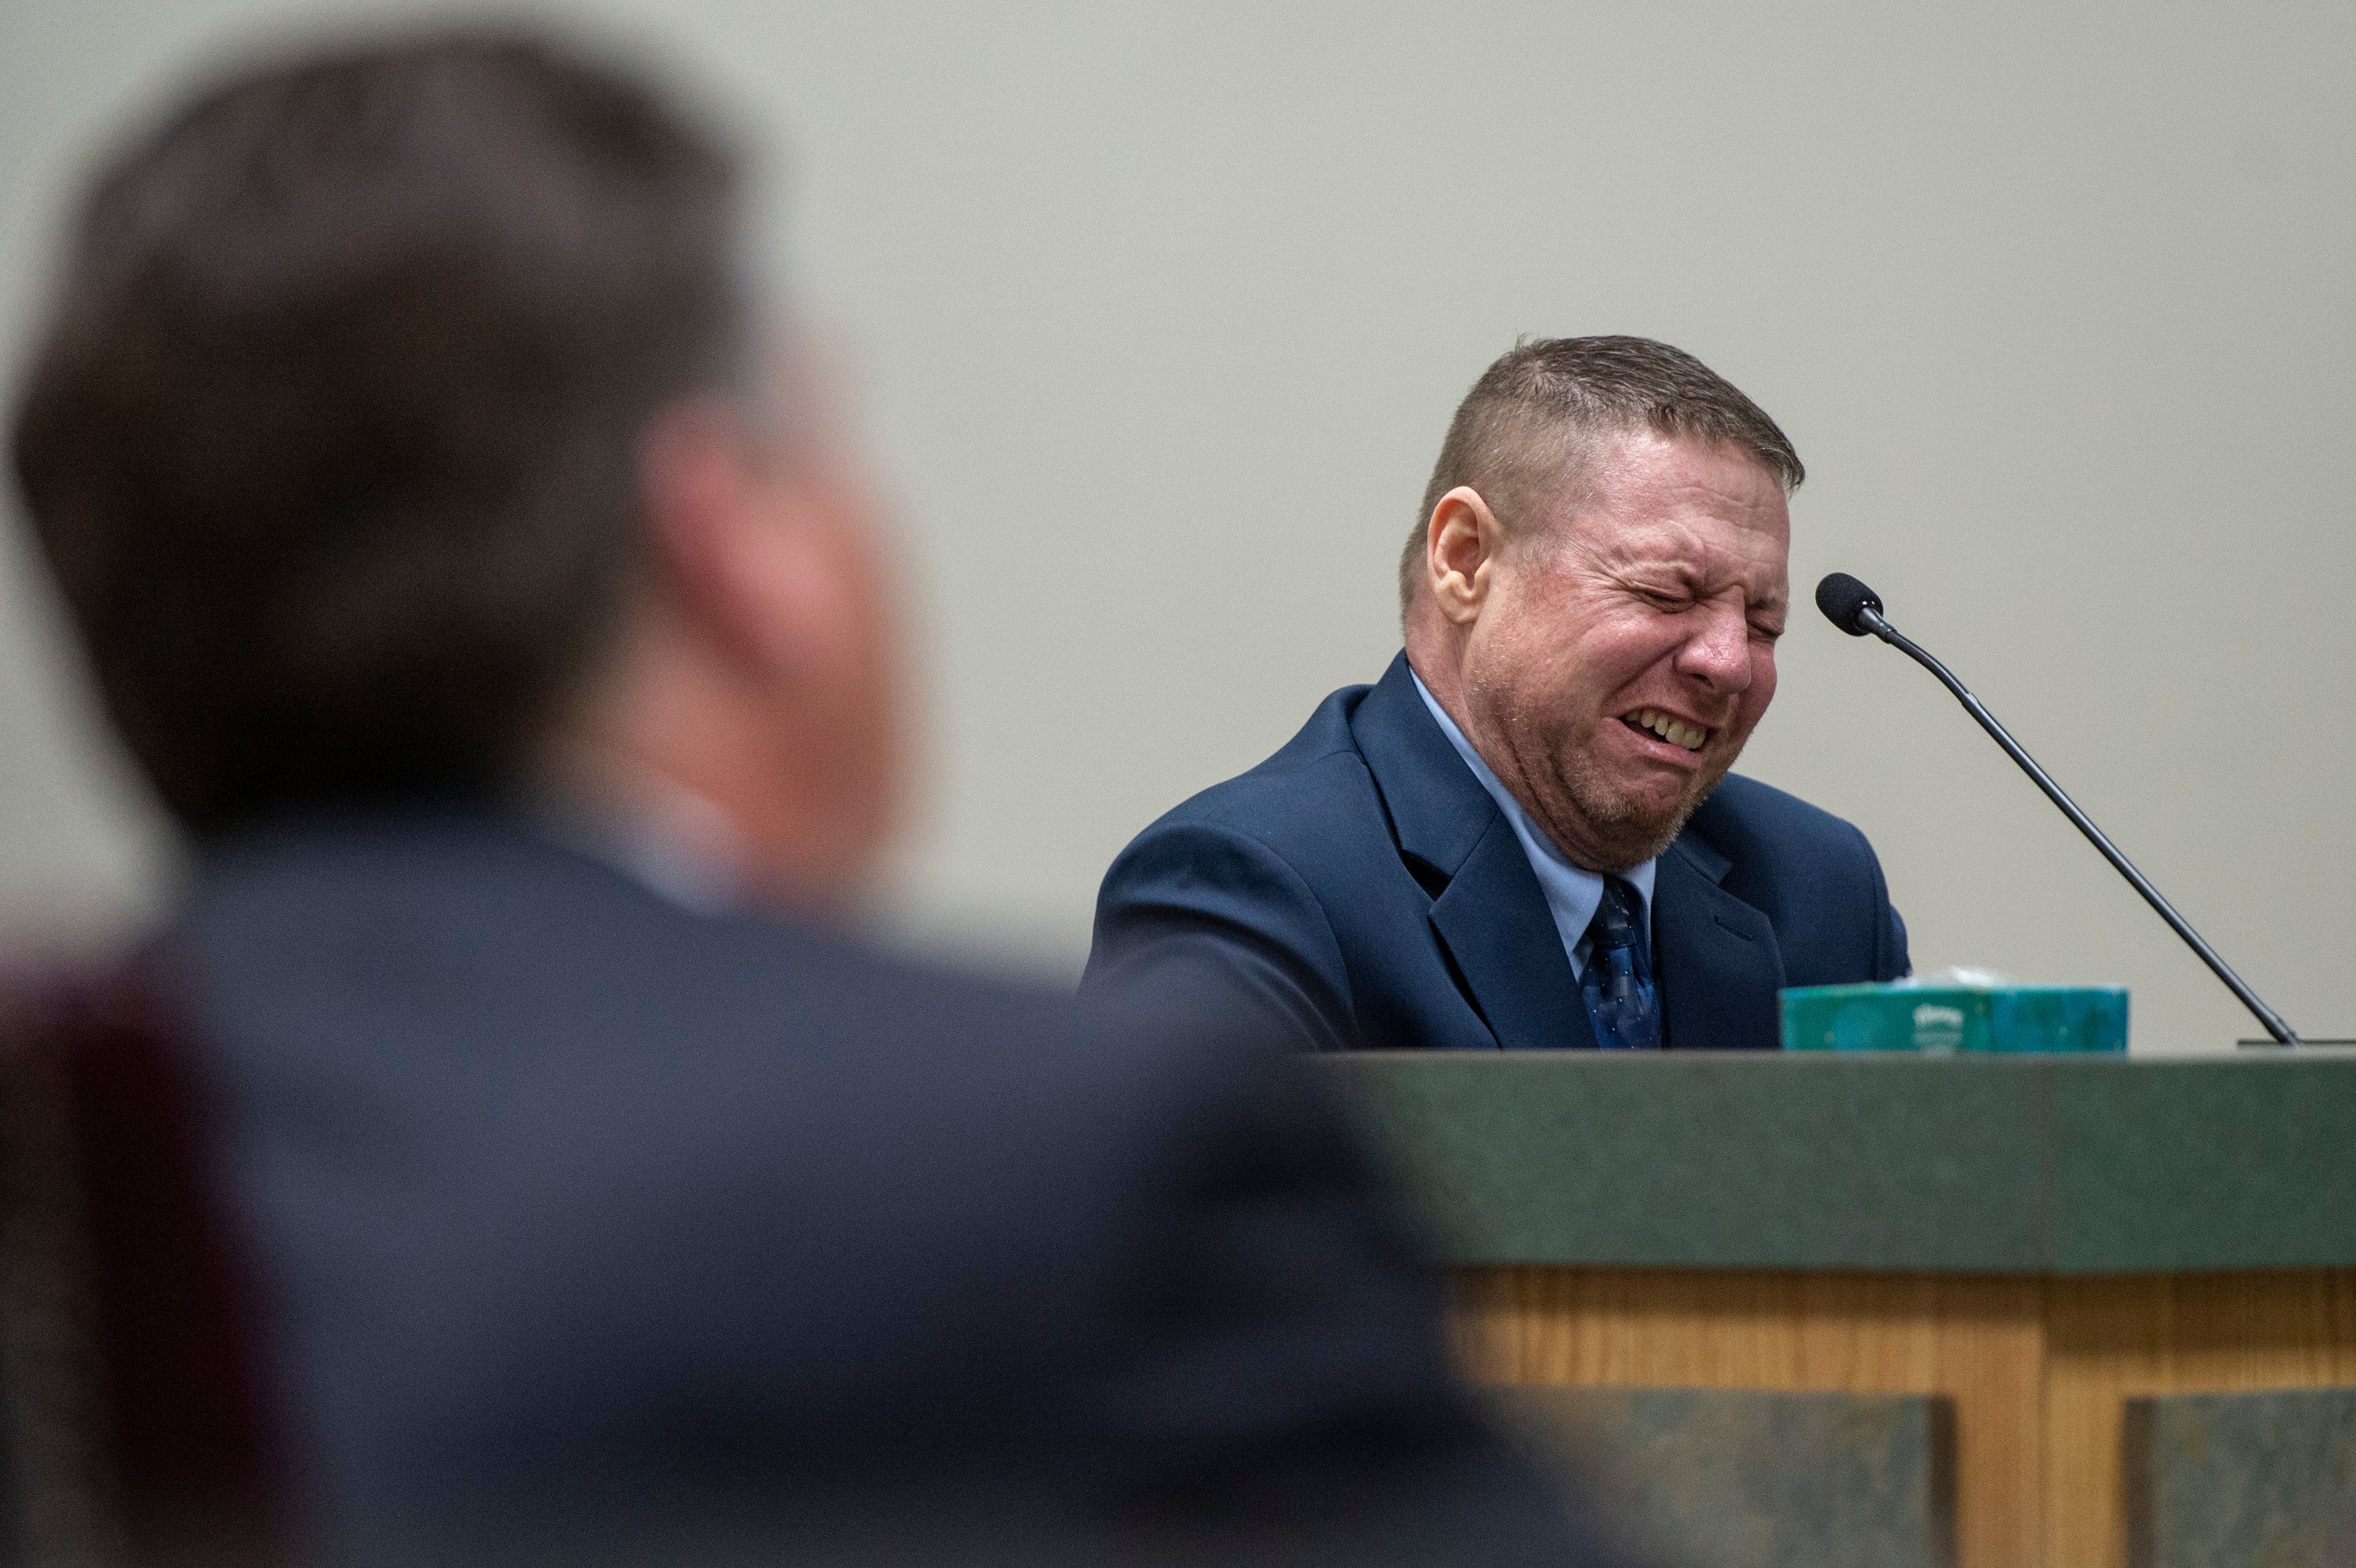 Jacob Blair Scott, who is accused of sexually assaulting a minor, cries out while on the witness stand after testifying about his family relationships.